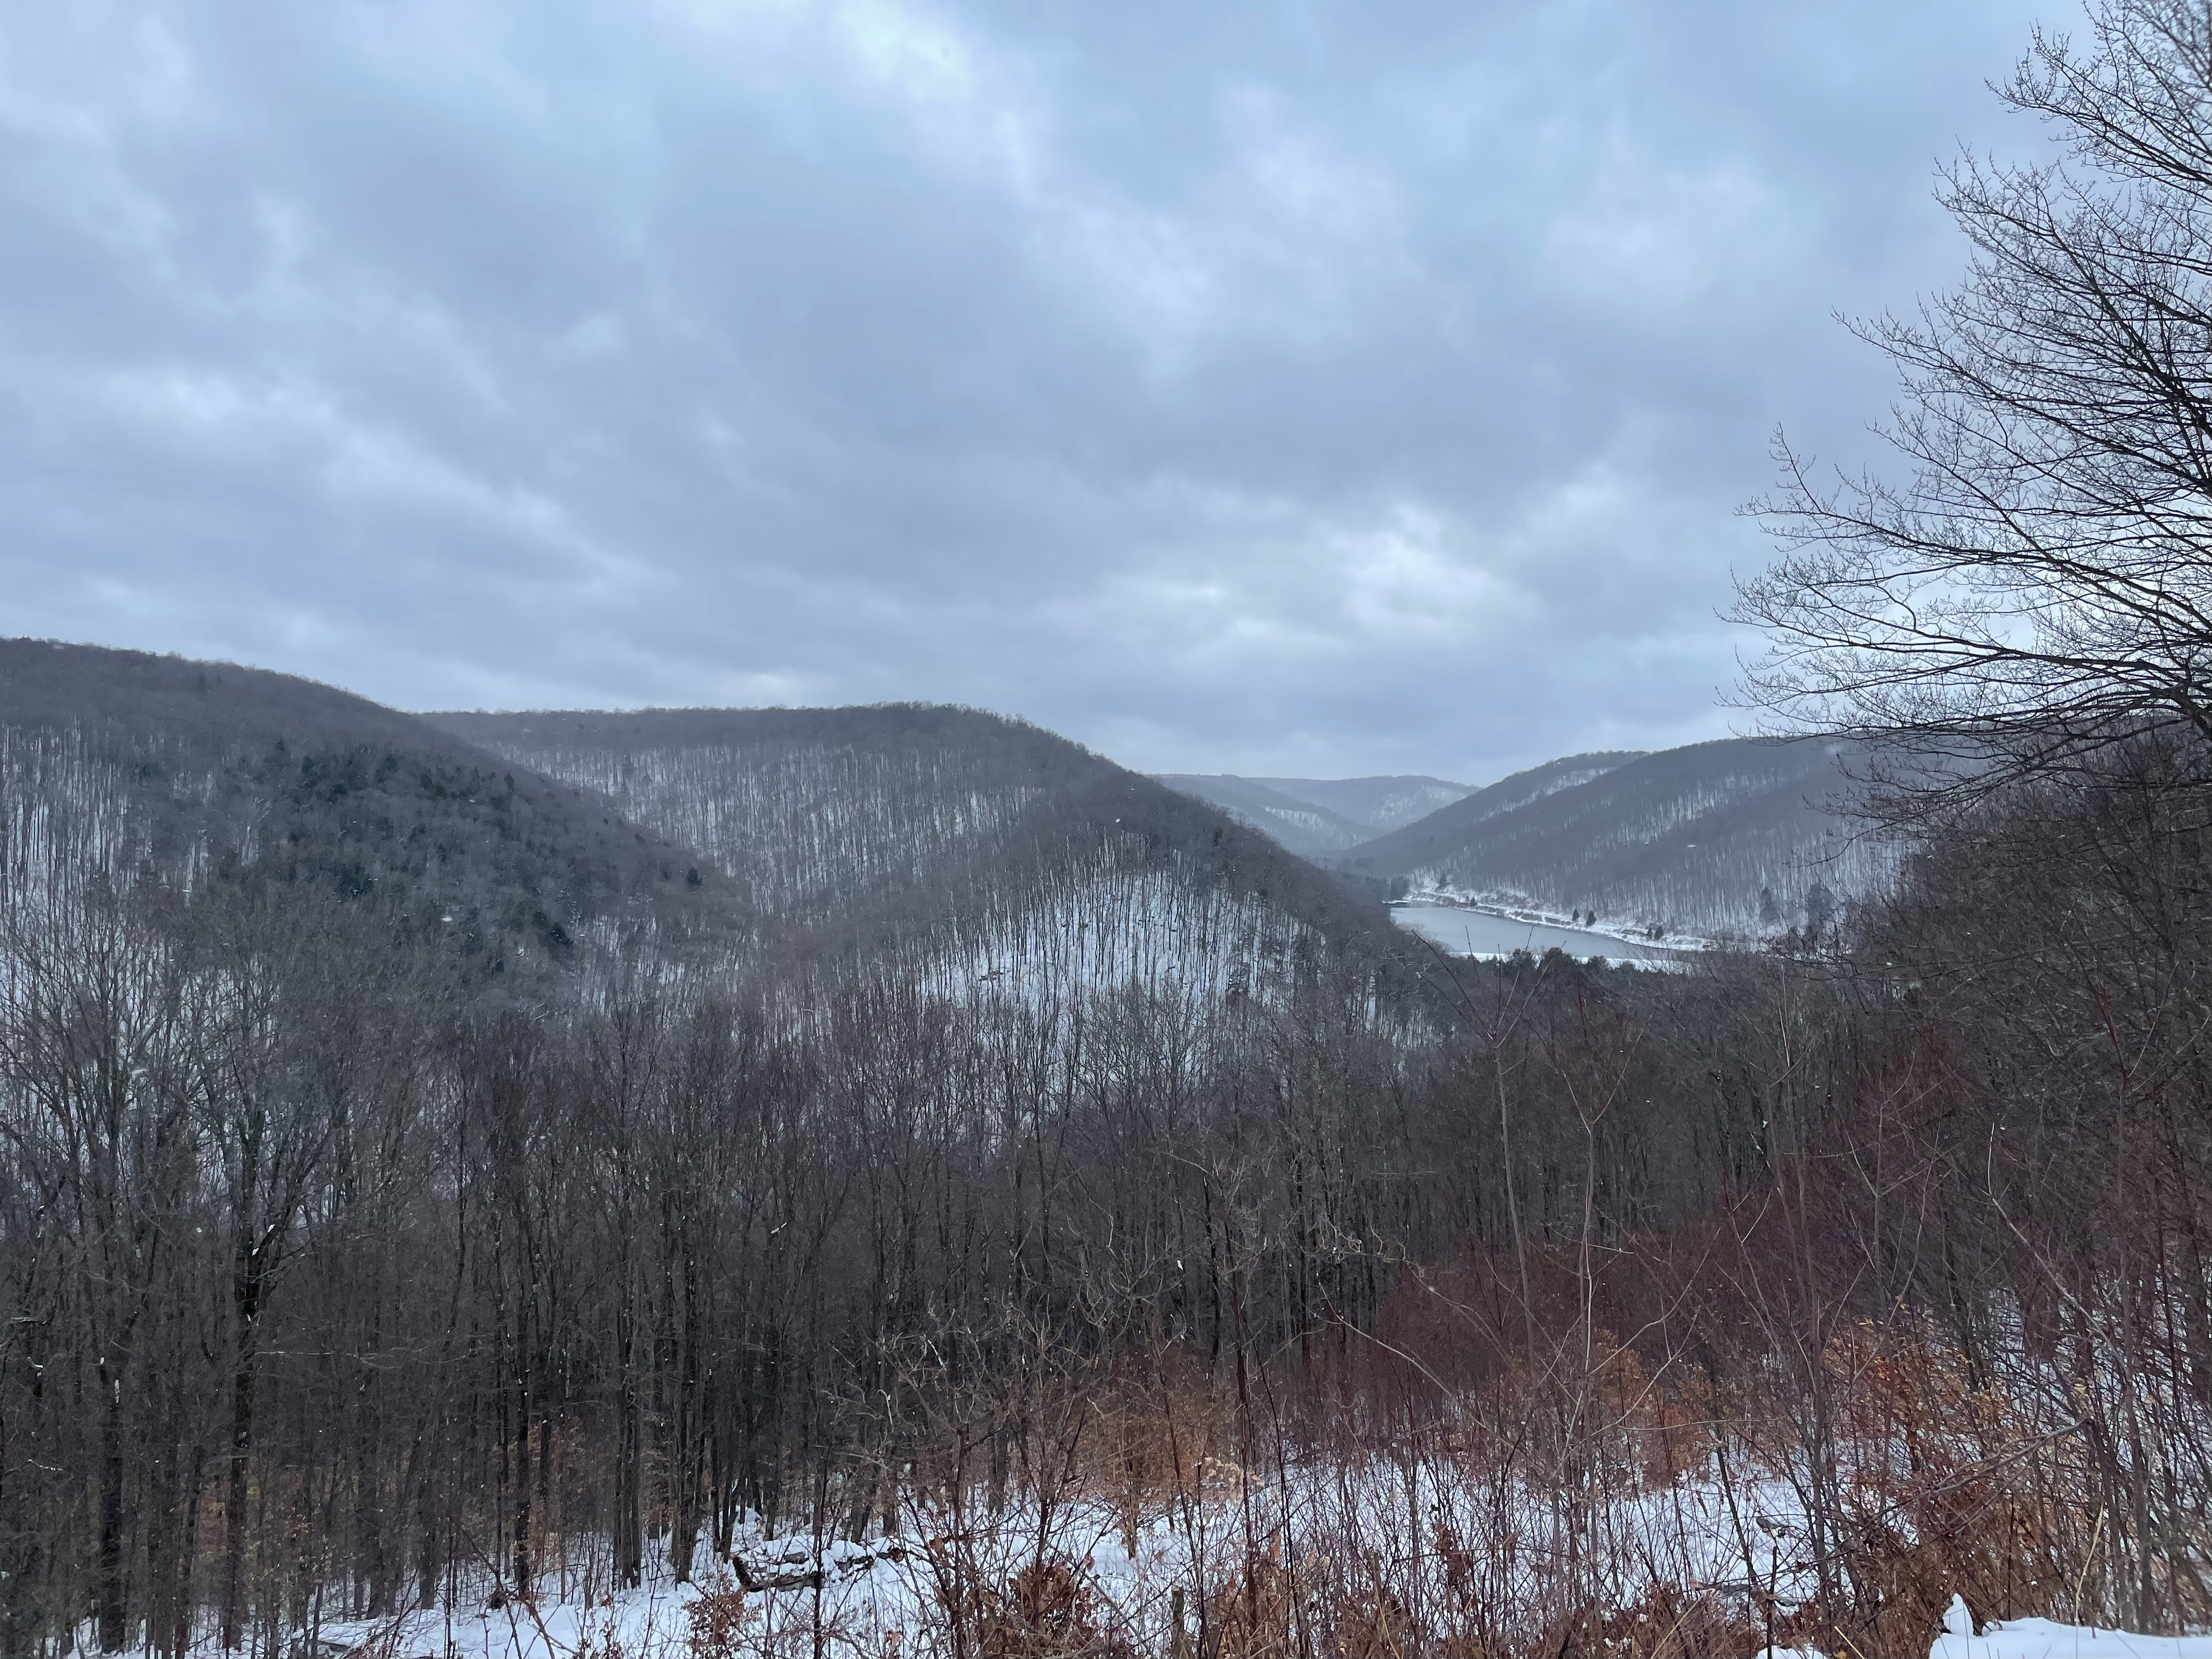 Vista of PA ridge in winter with snow and bare trees